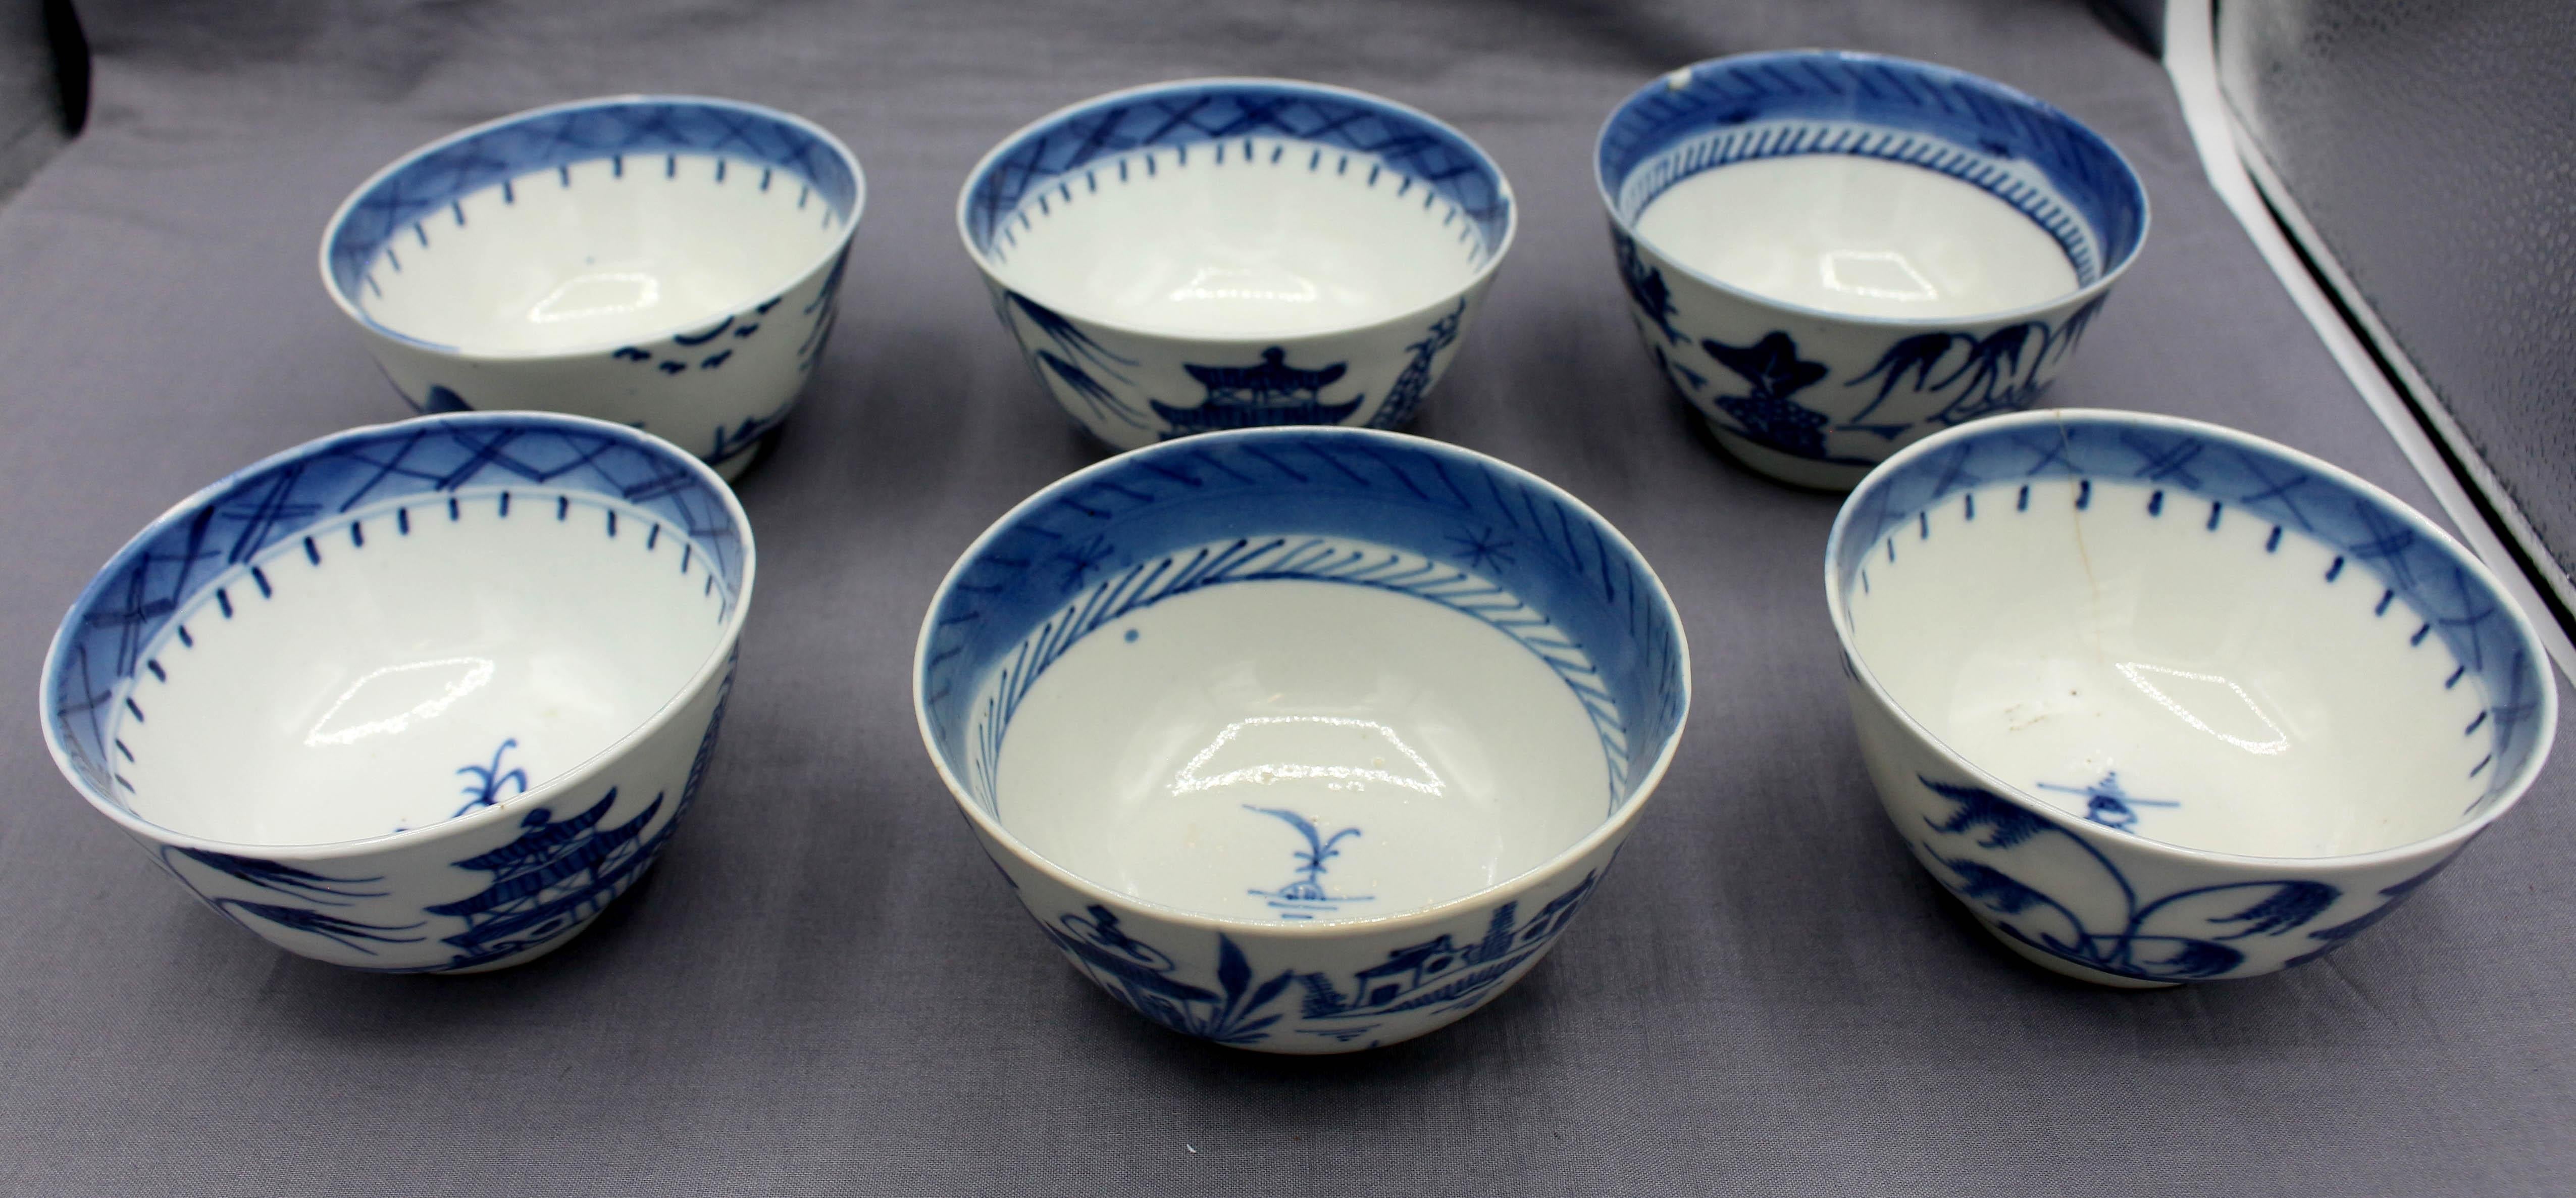 Mid-19th century group of 6 Blue Canton porcelain rice or soup bowls, Chinese export. Some hairlines & nicks. Fine, thin potting. 1 with hairline & chip; 2 with minor rim nick; 1 with underglaze rim roughness.
4 3/8